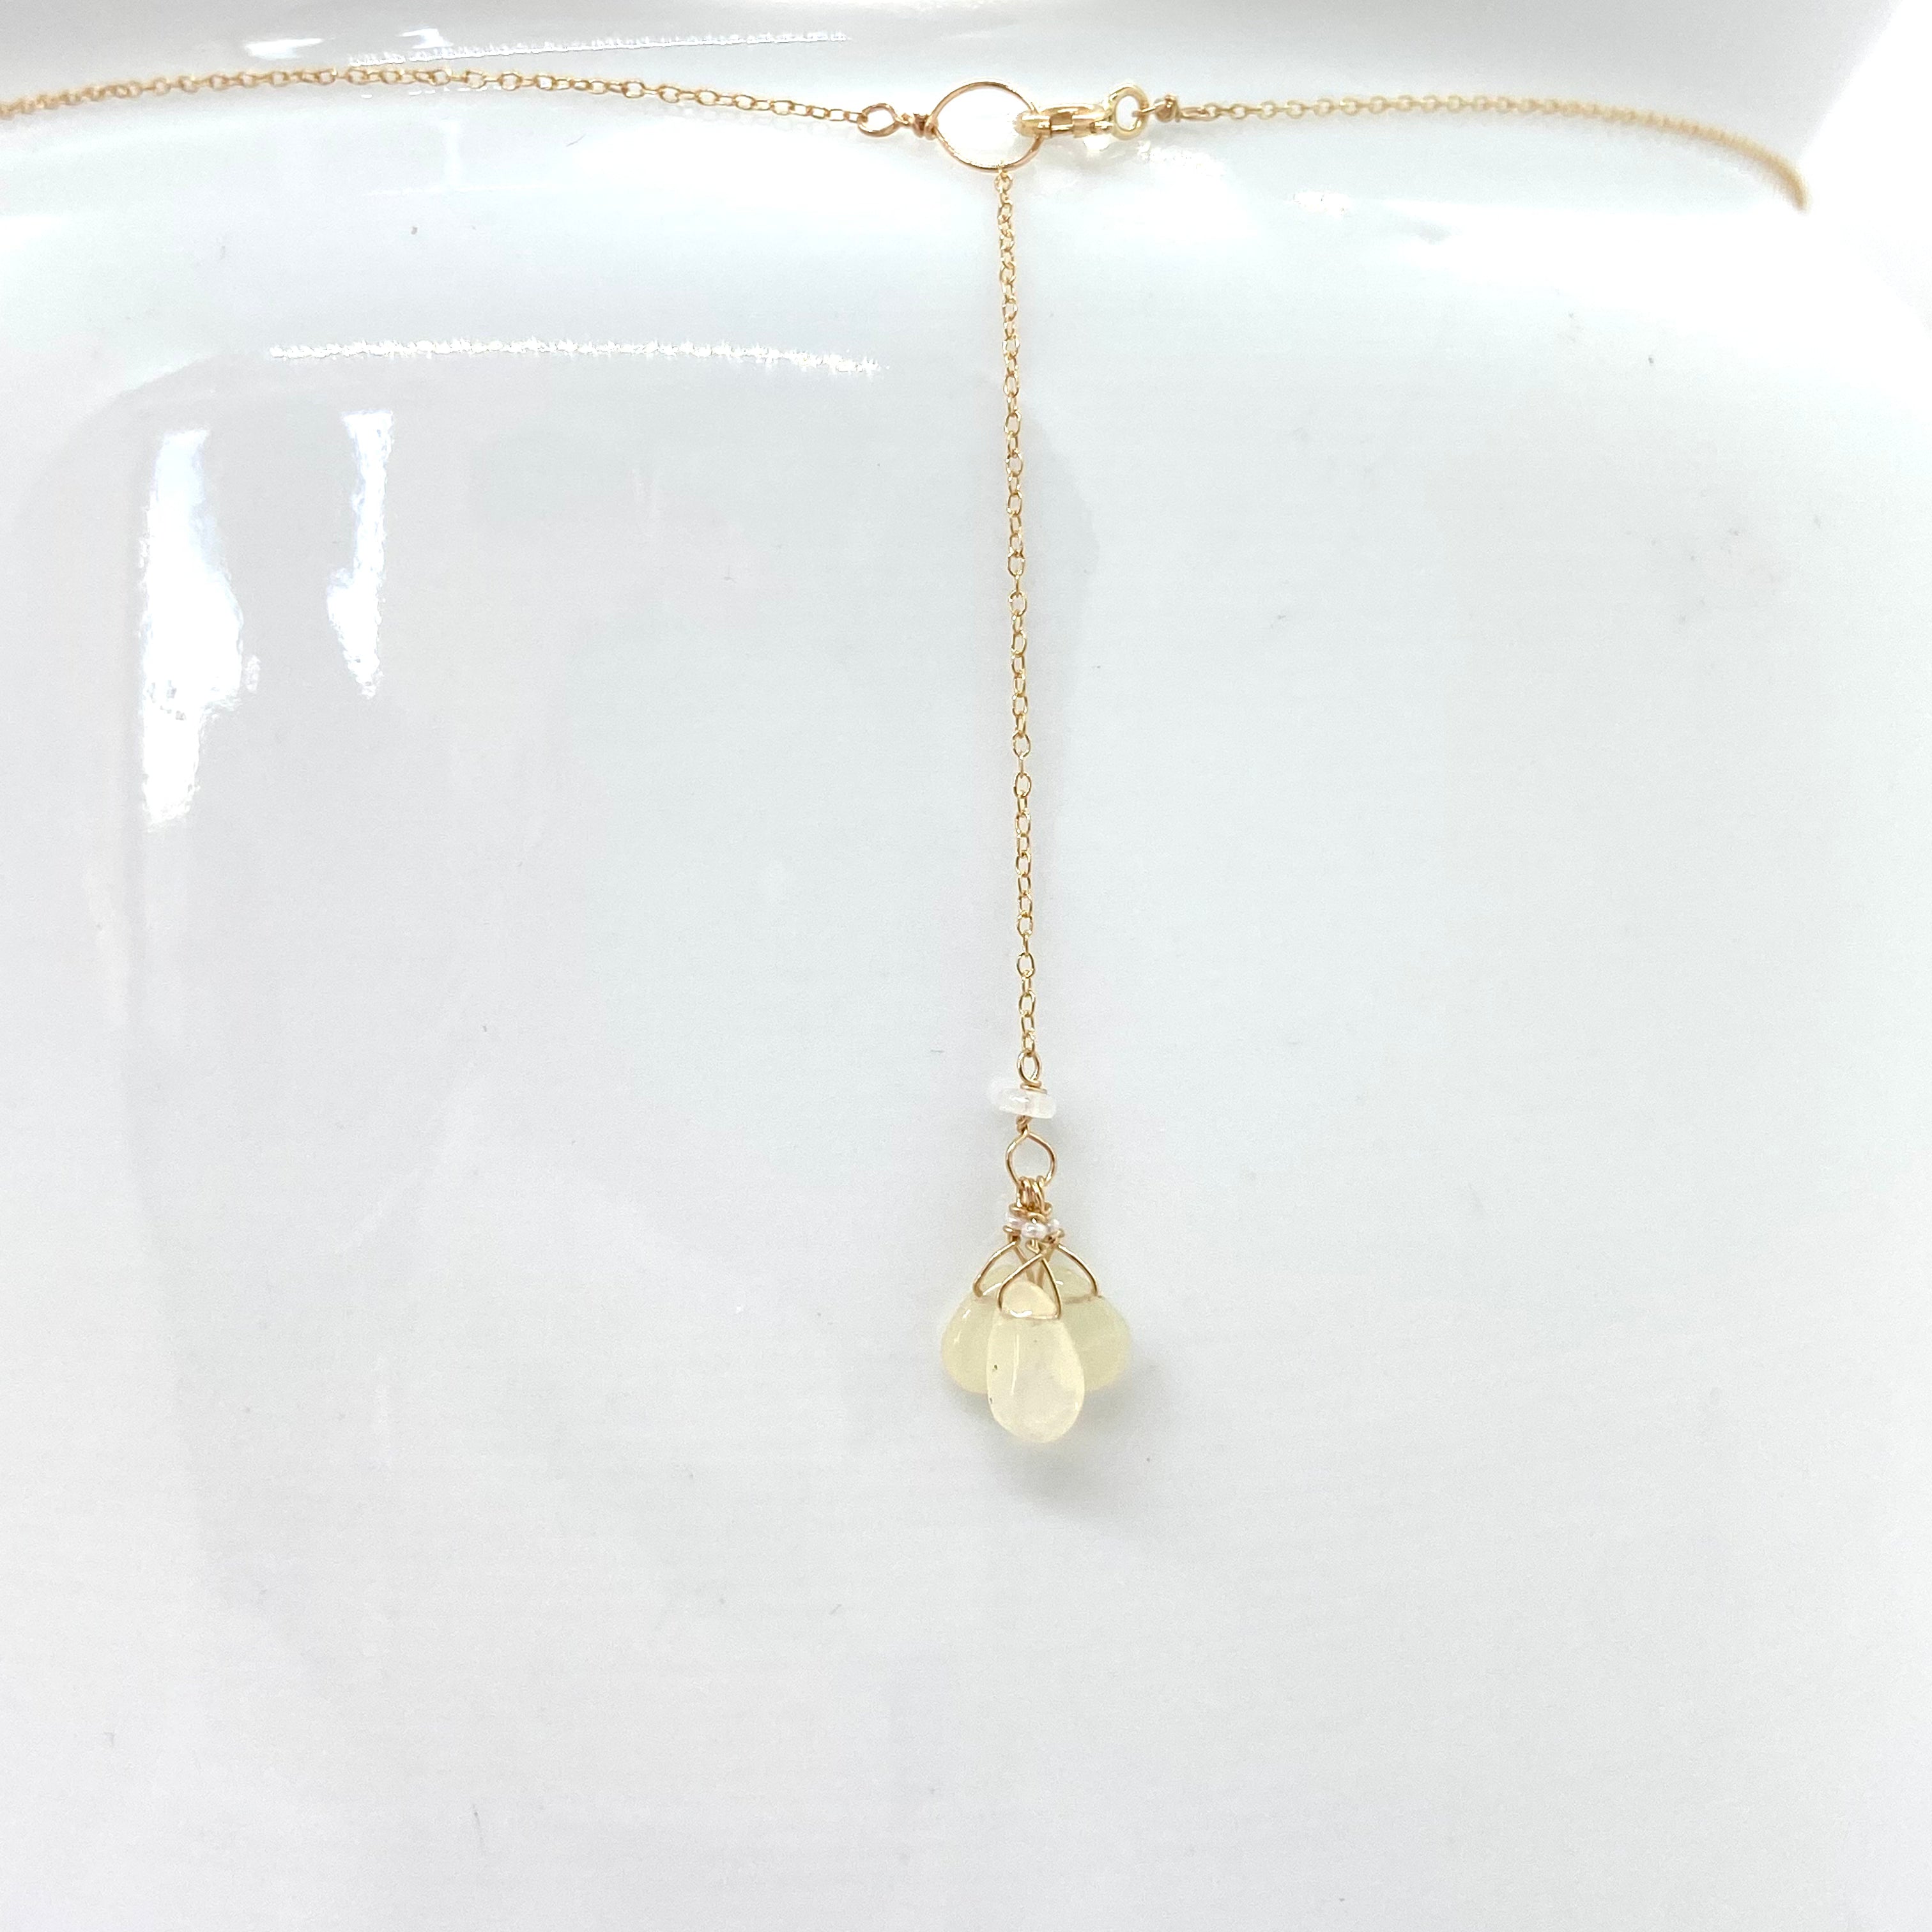 14k Gold Chain Necklace w/ 18k Gold Heart Pendant